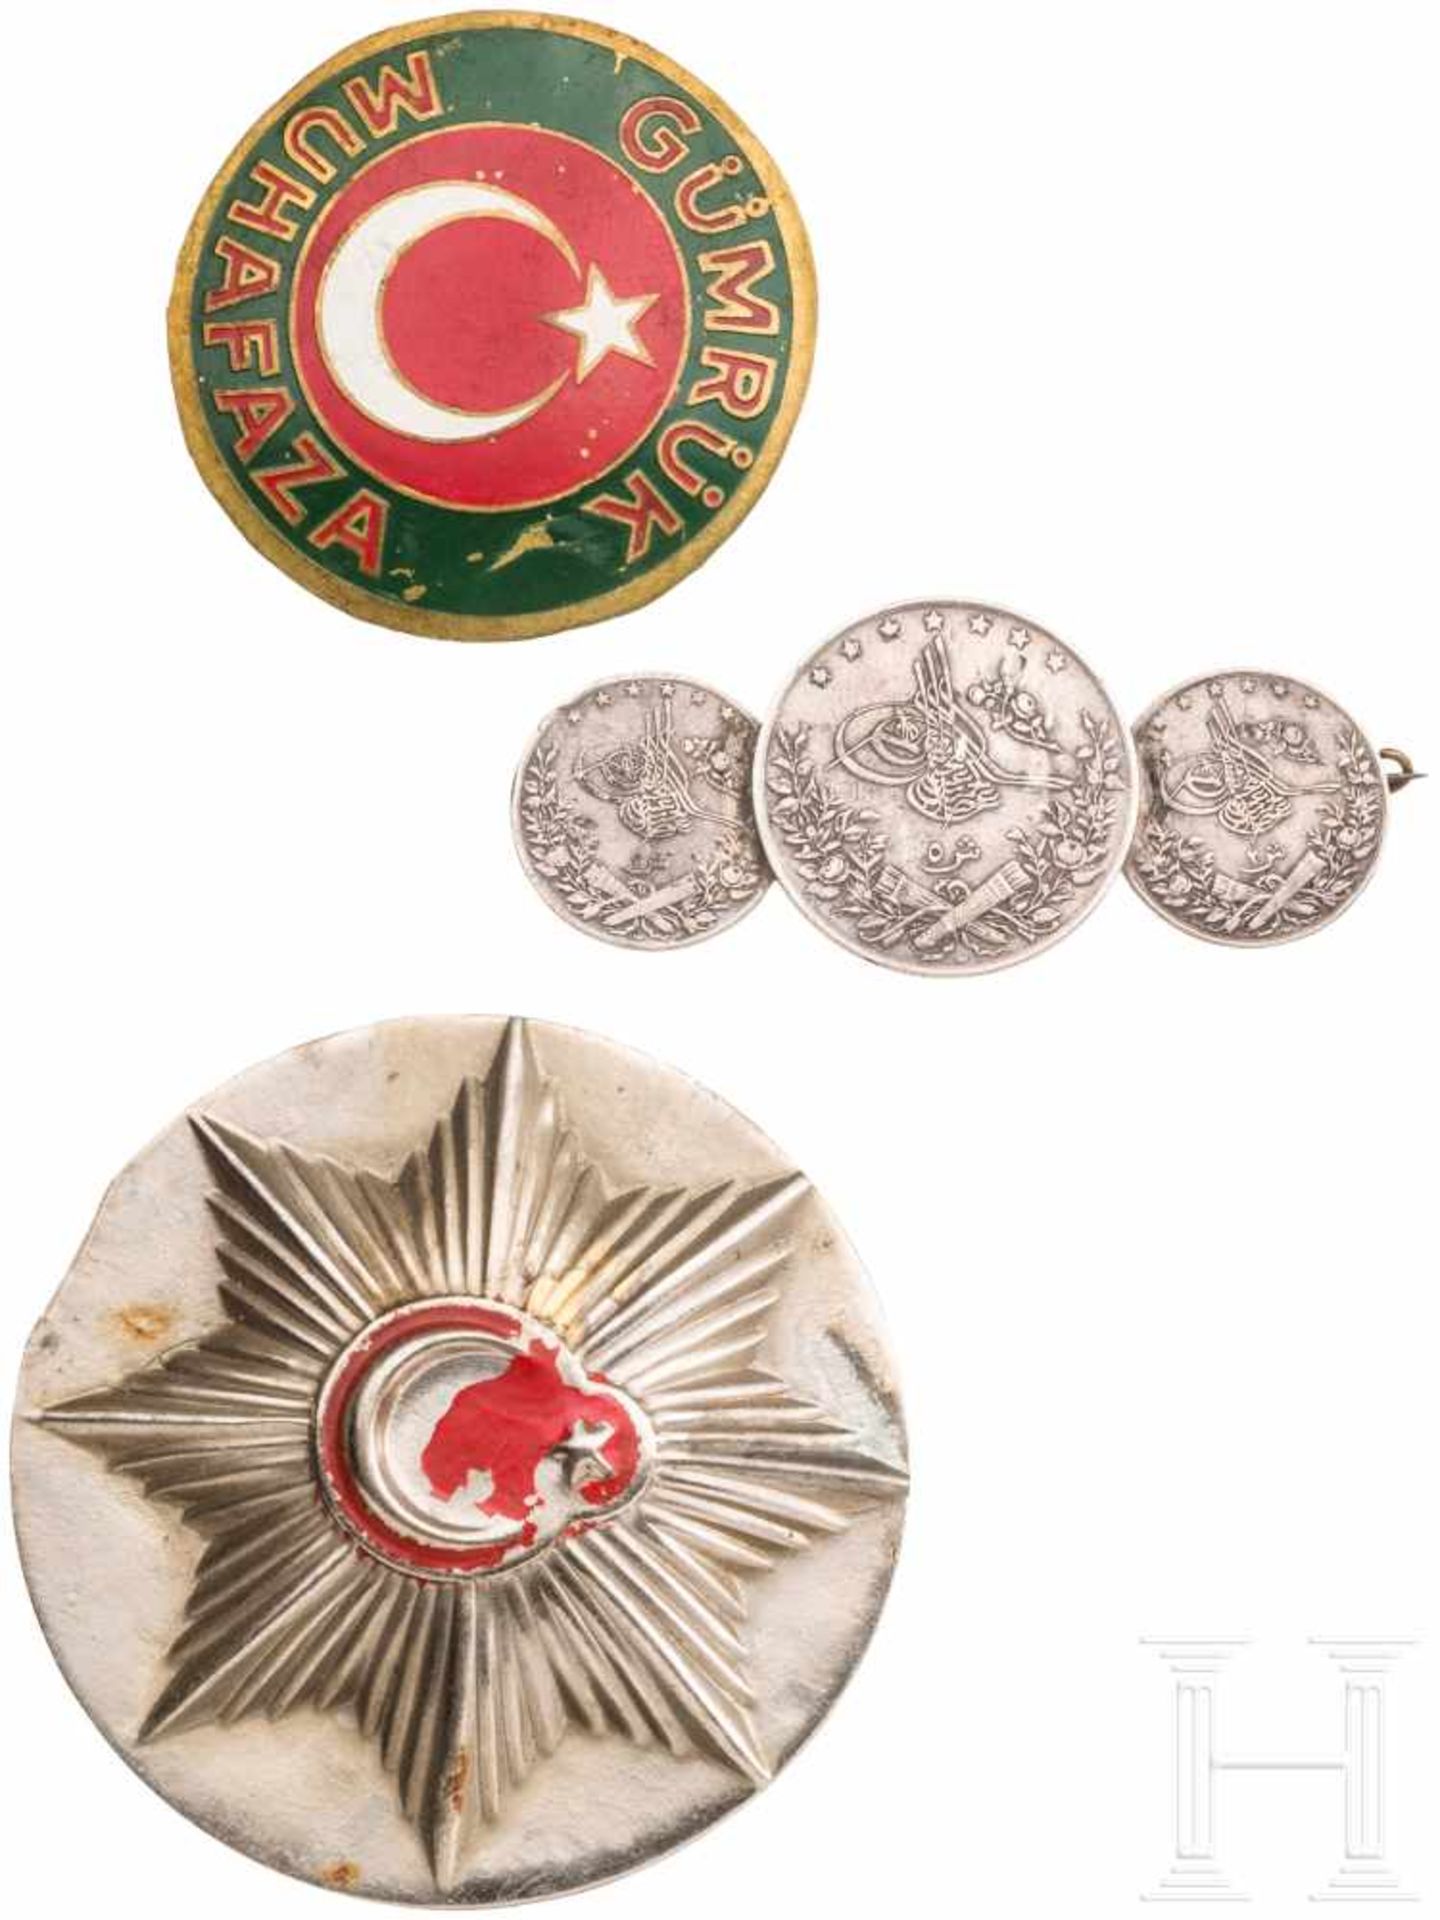 Three silver medals 1875, police and customs badges, TurkeySilber, rs. datiert "1293" (1875), im